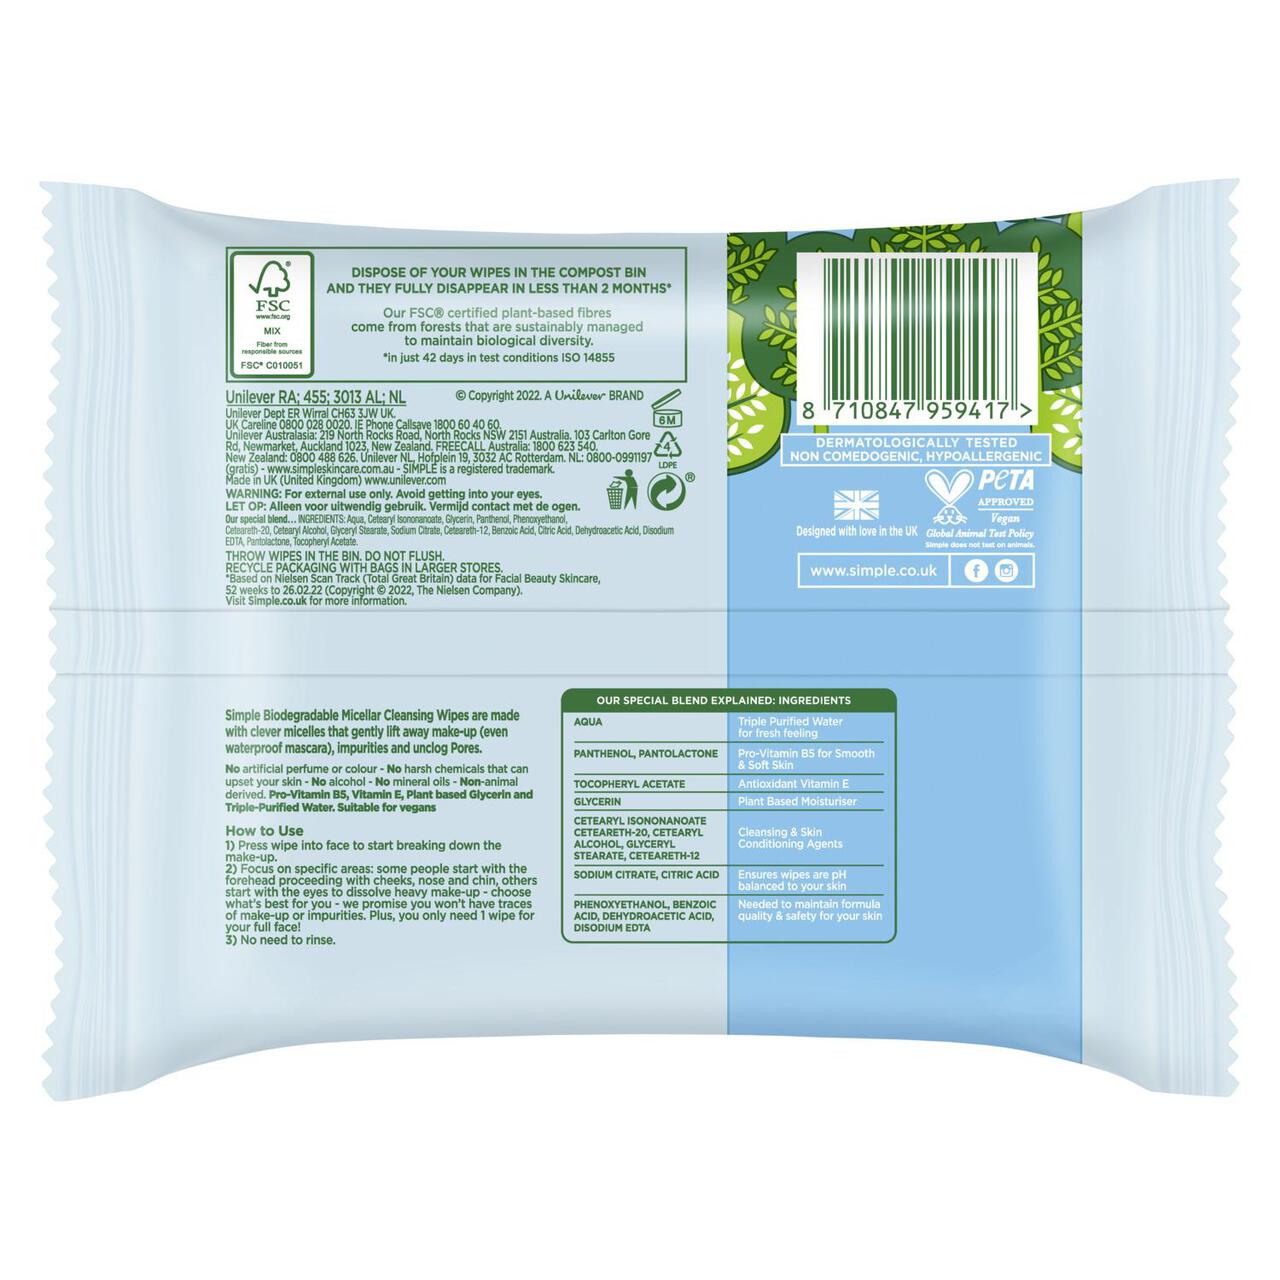 Simple Kind to Skin Micellar Biodegradable Cleansing Wipes 20 per pack